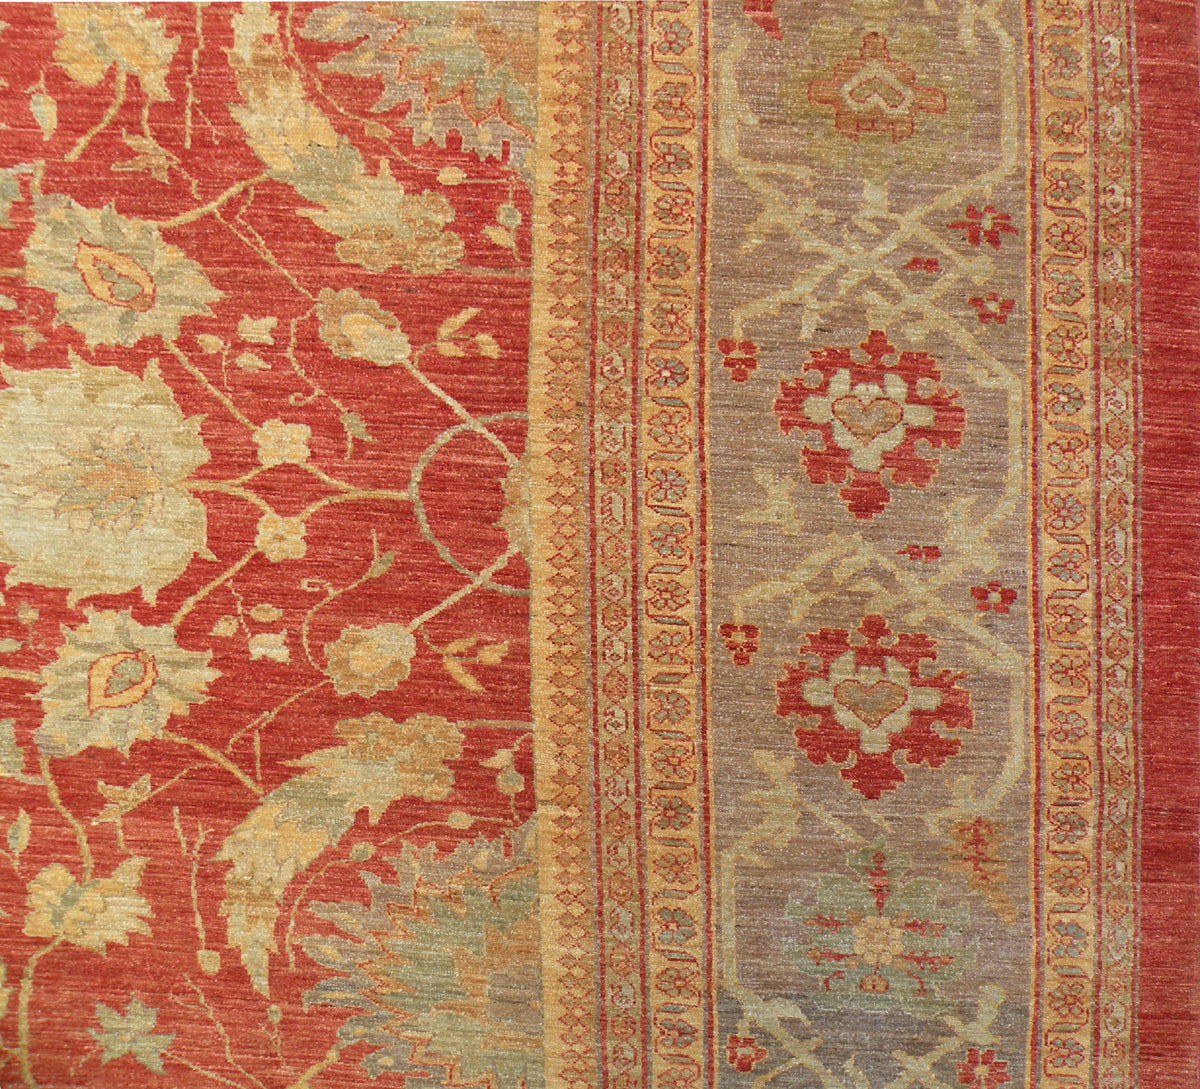 16'x21' Large Floral Red Blue Gold Sultanabad Design Ariana Traditional Rug